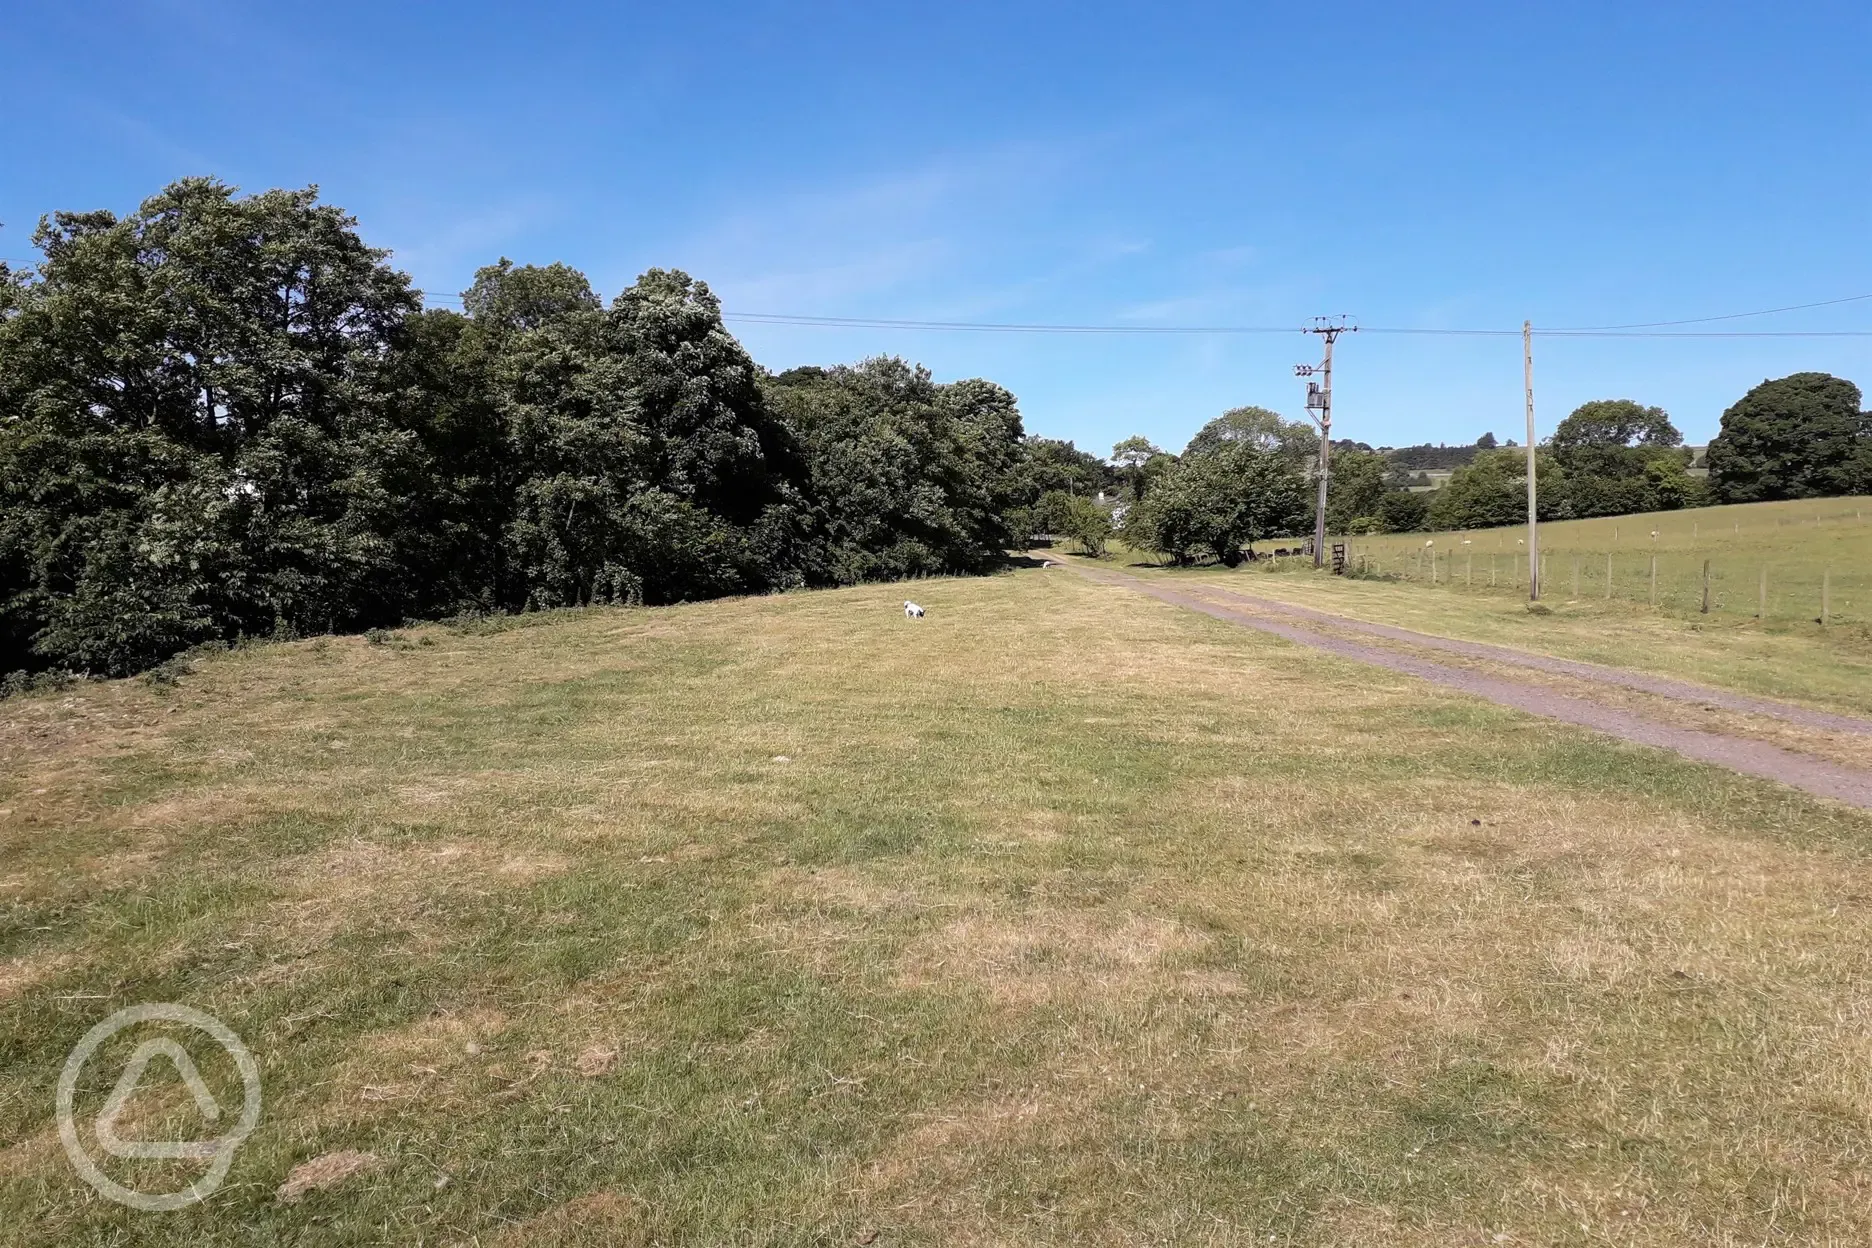 The site in July 2018. 